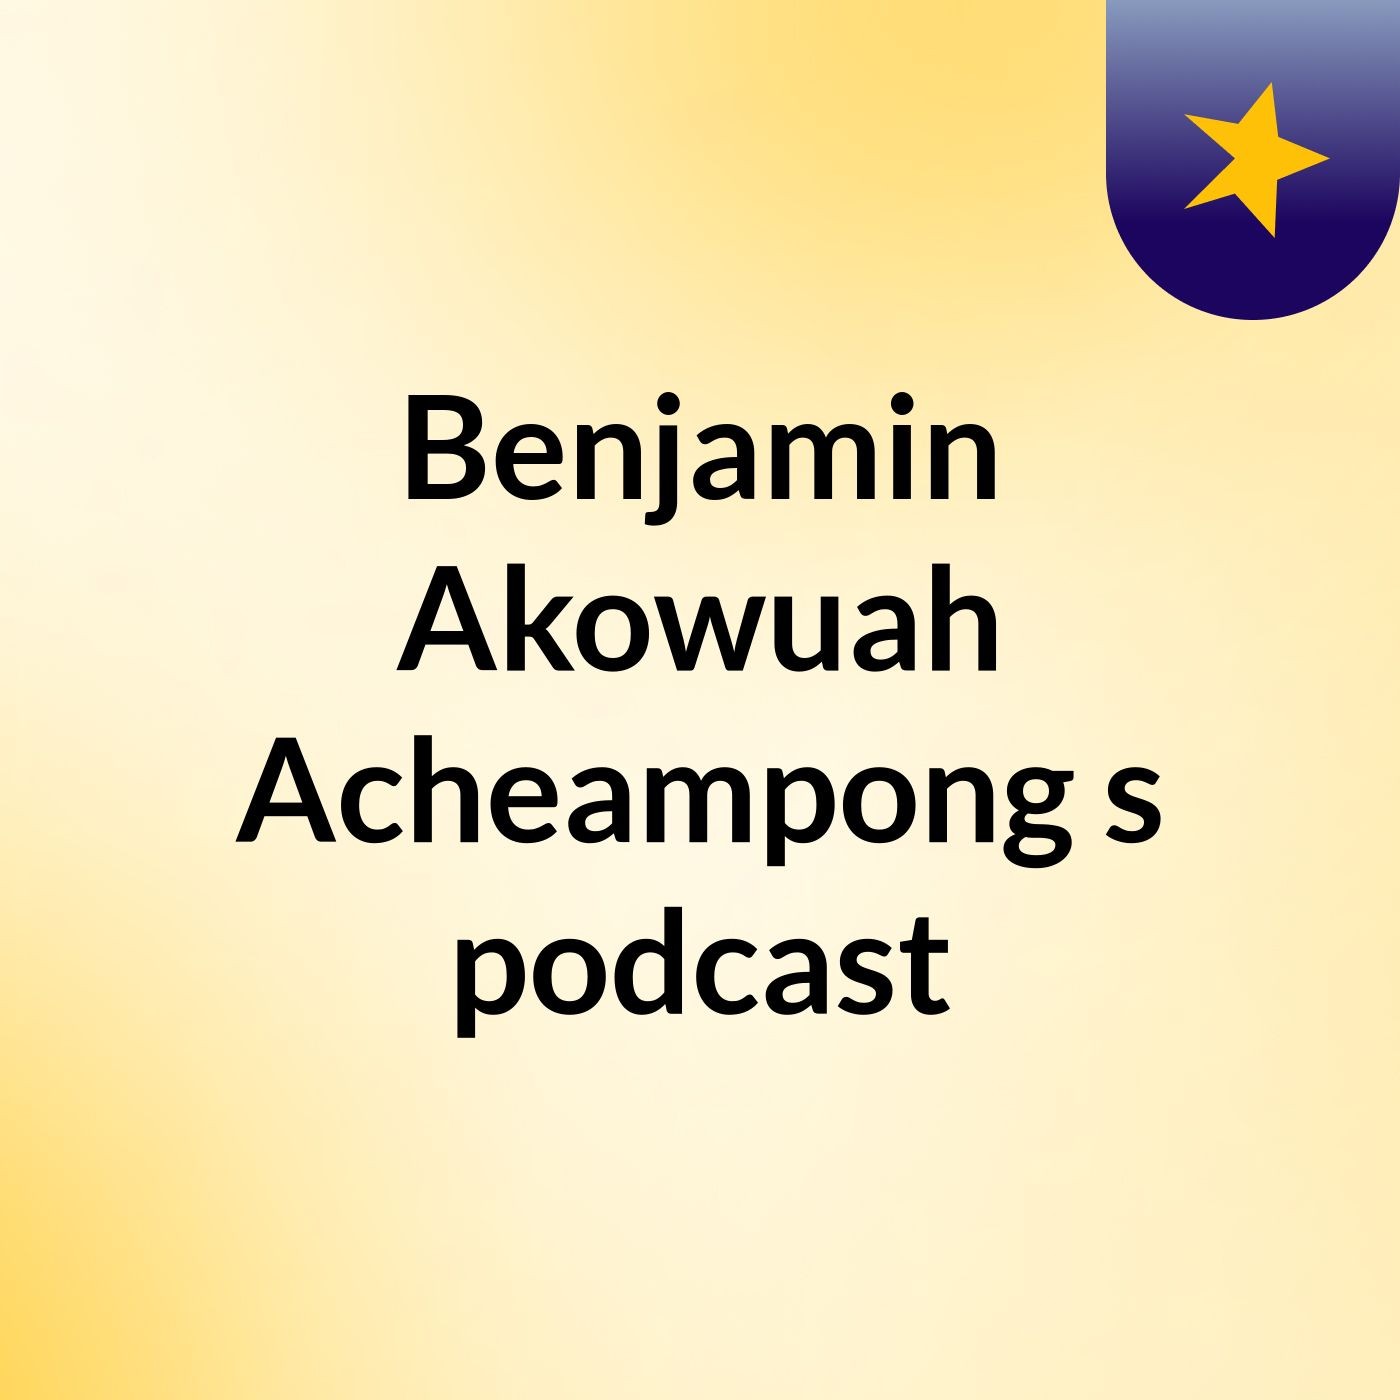 Benjamin Akowuah Acheampong's podcast